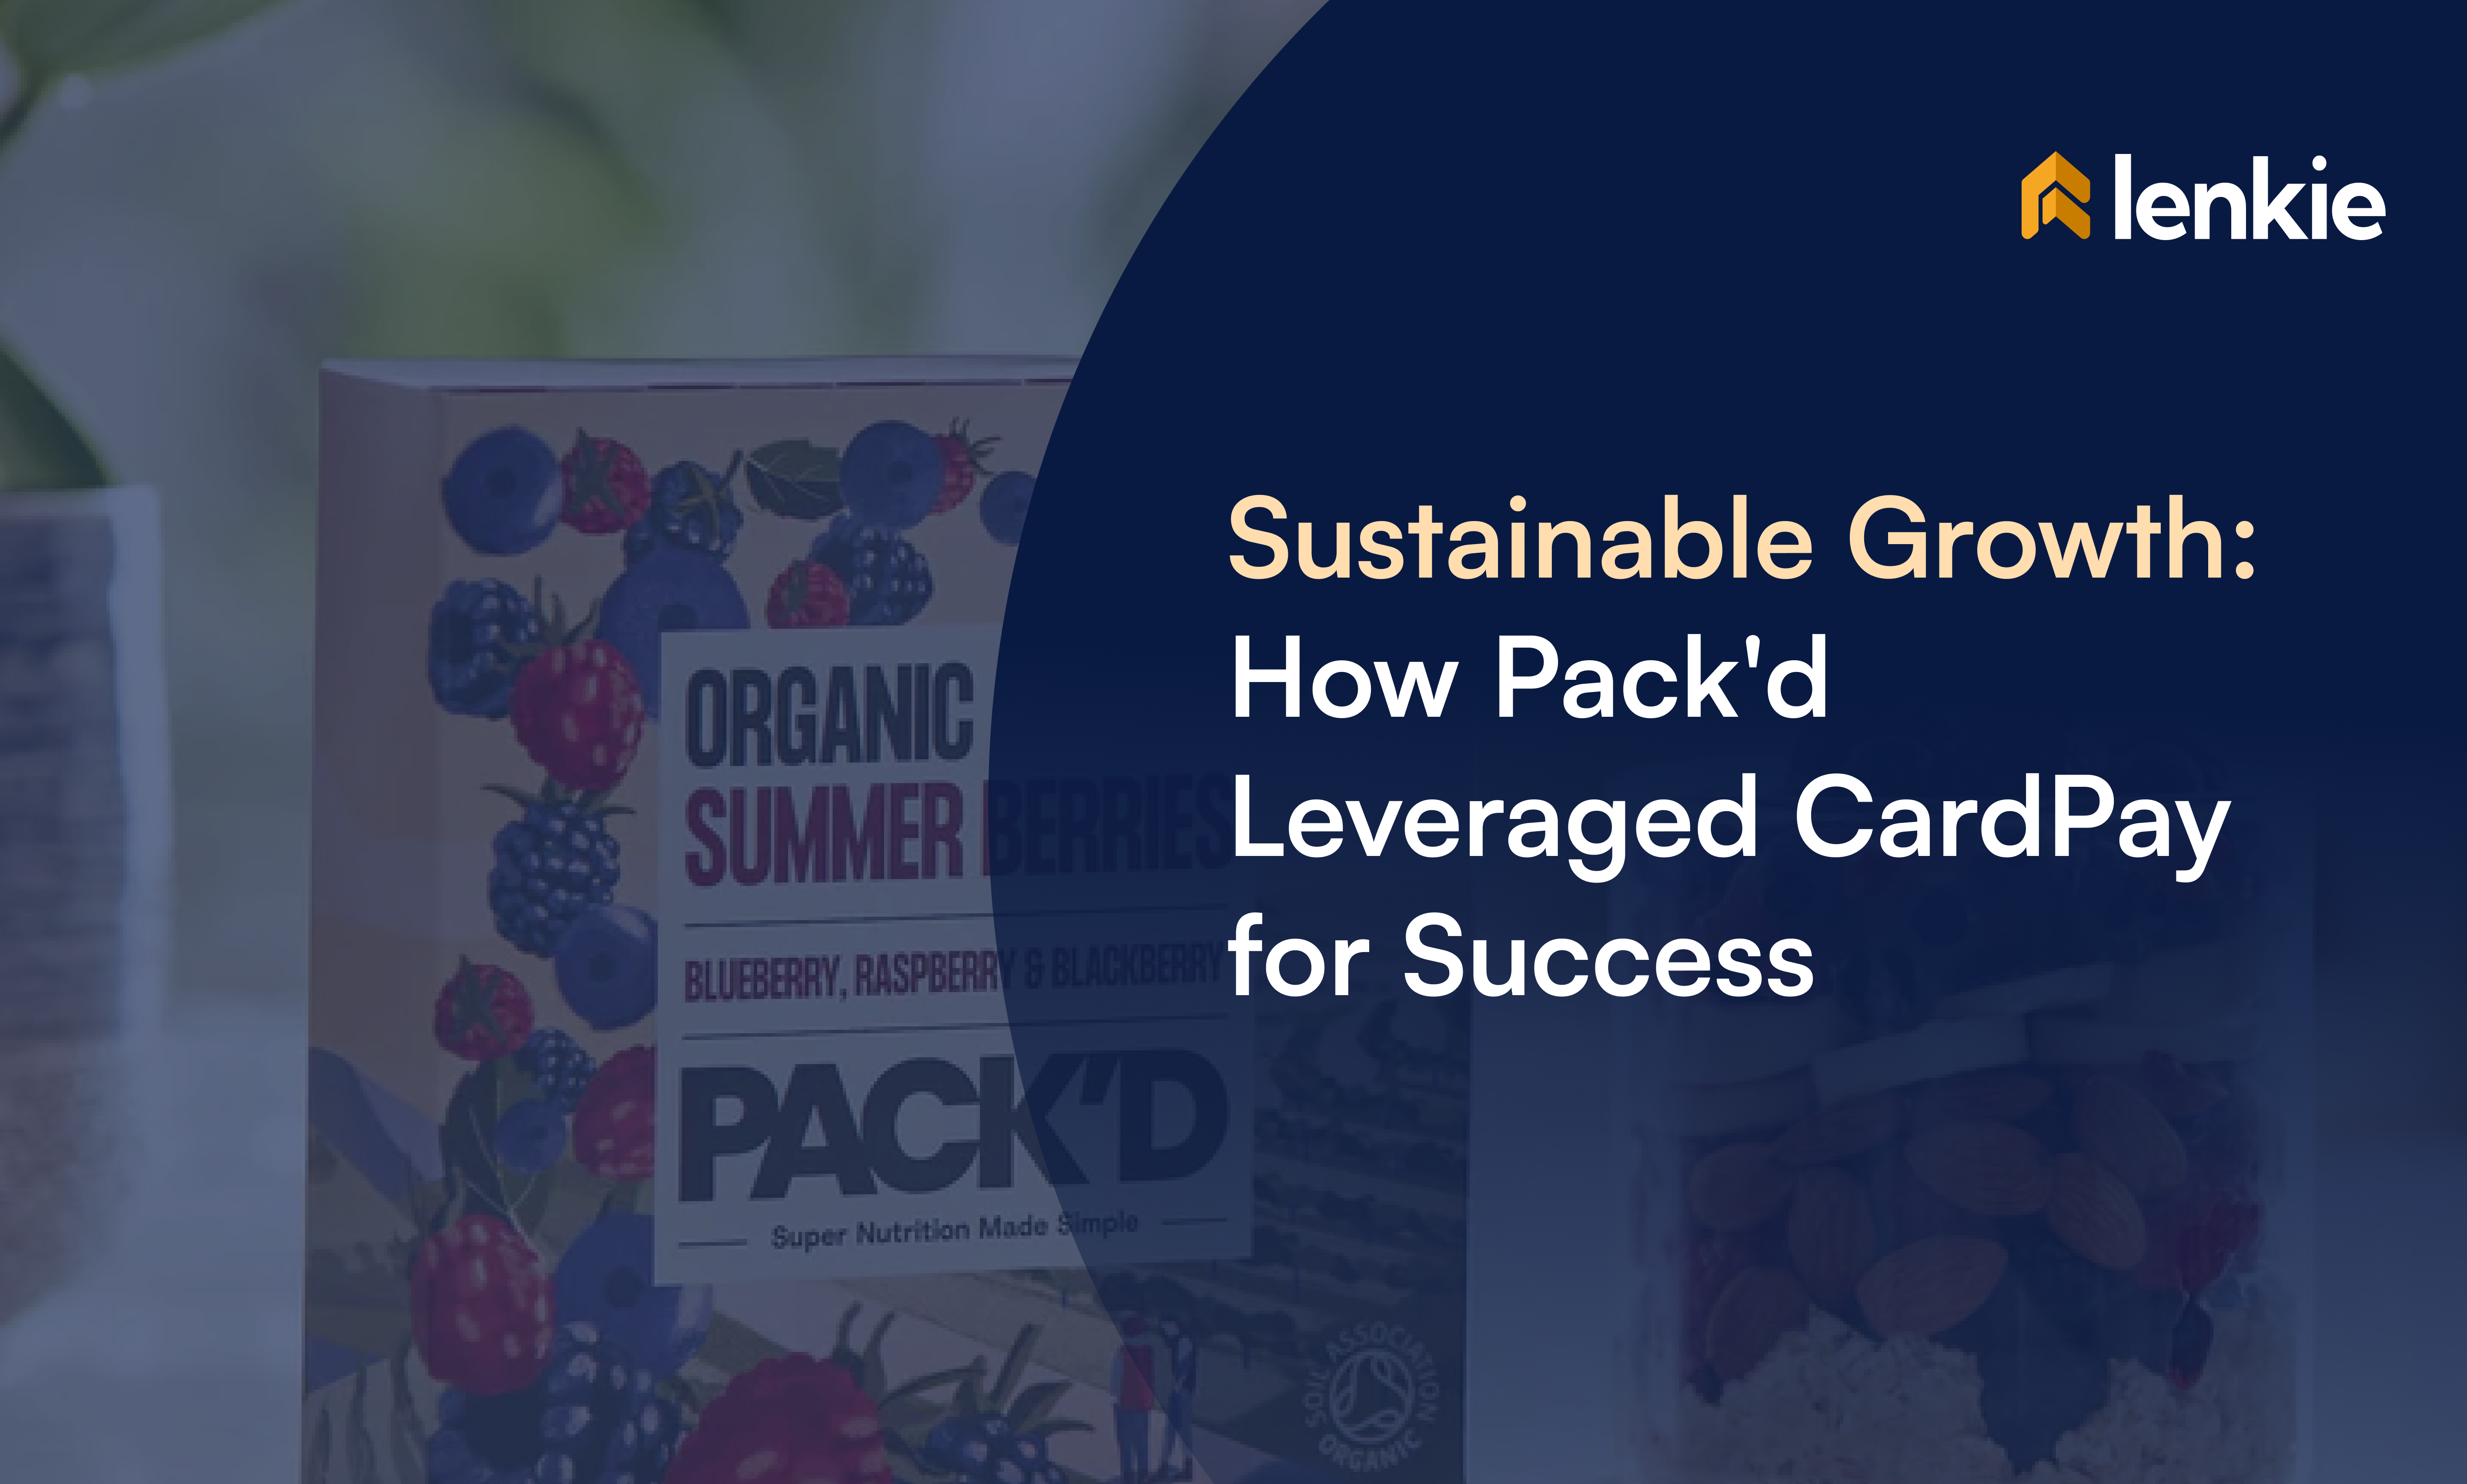 Sustainable Growth - How Pack'd Leveraged CardPay for Success